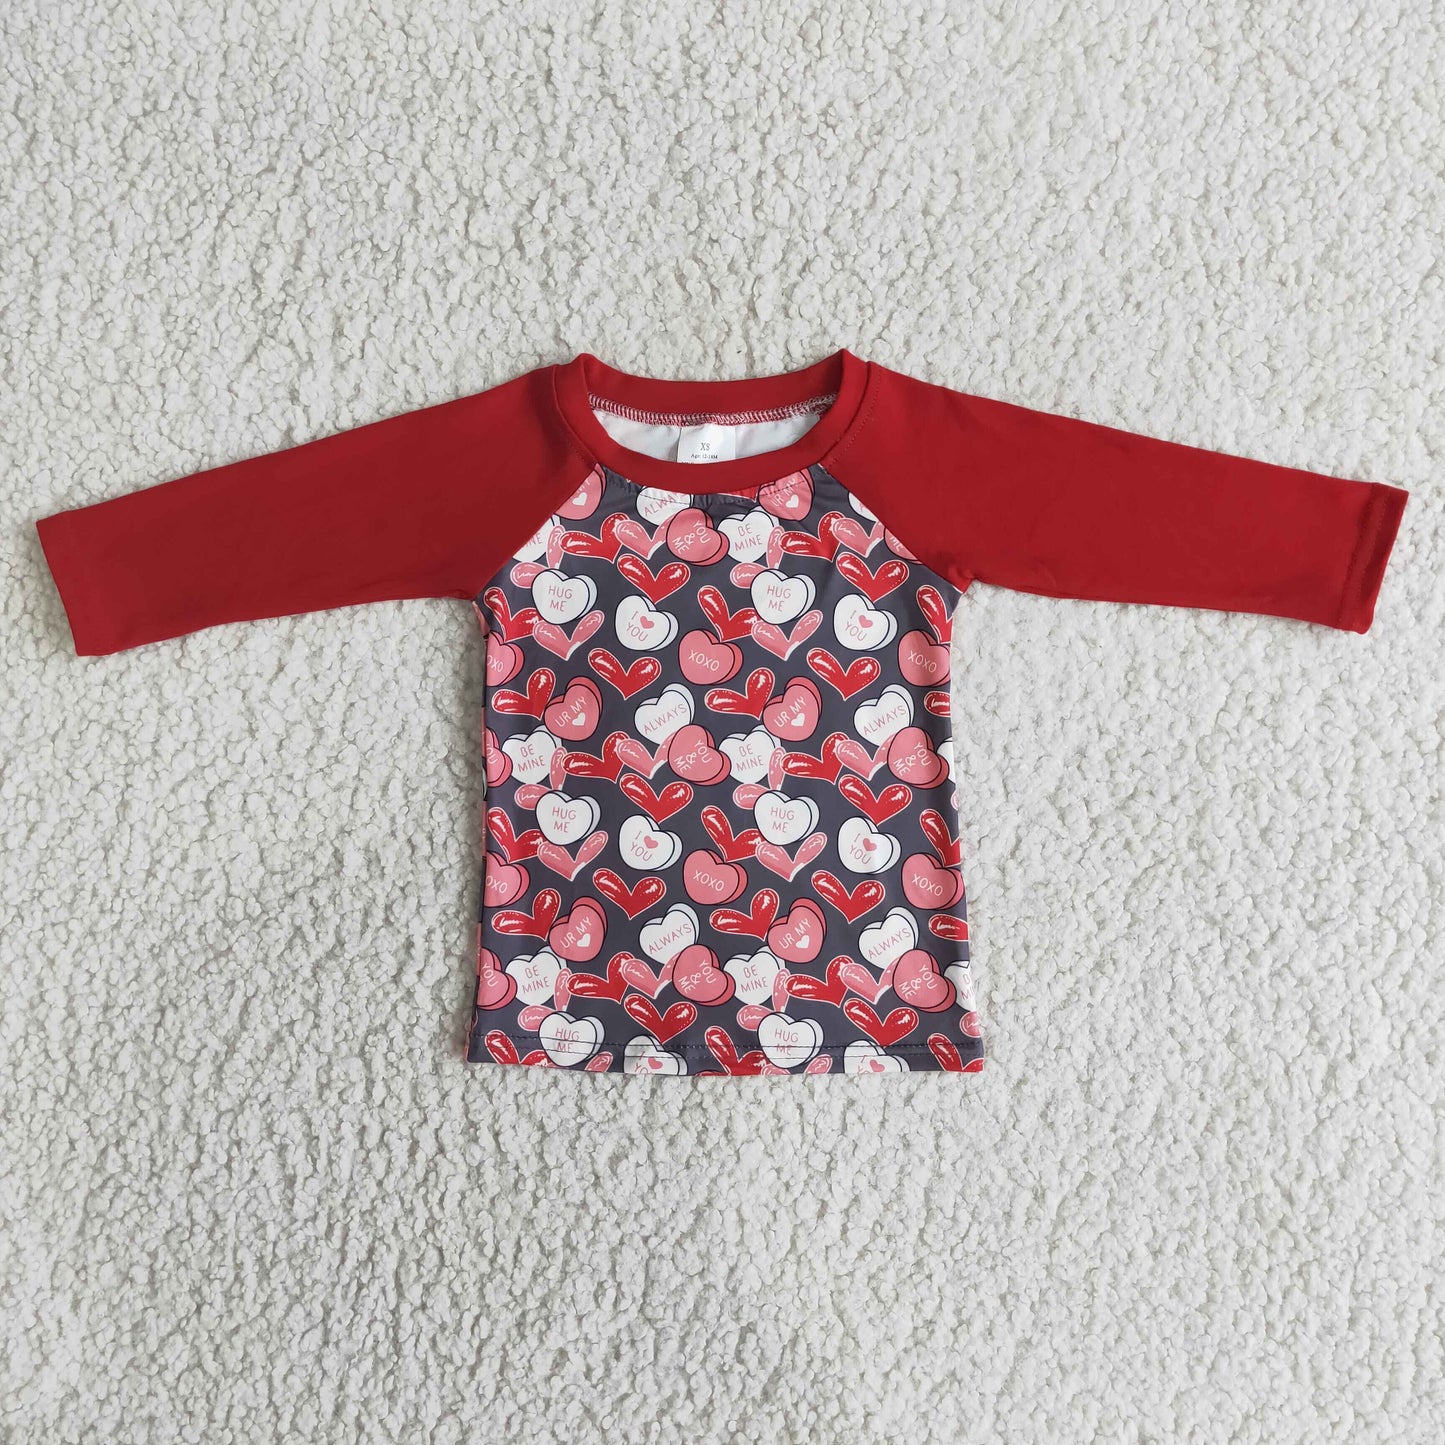 Red Heart Print Long Sleeve Shirt for Valentine’s Day